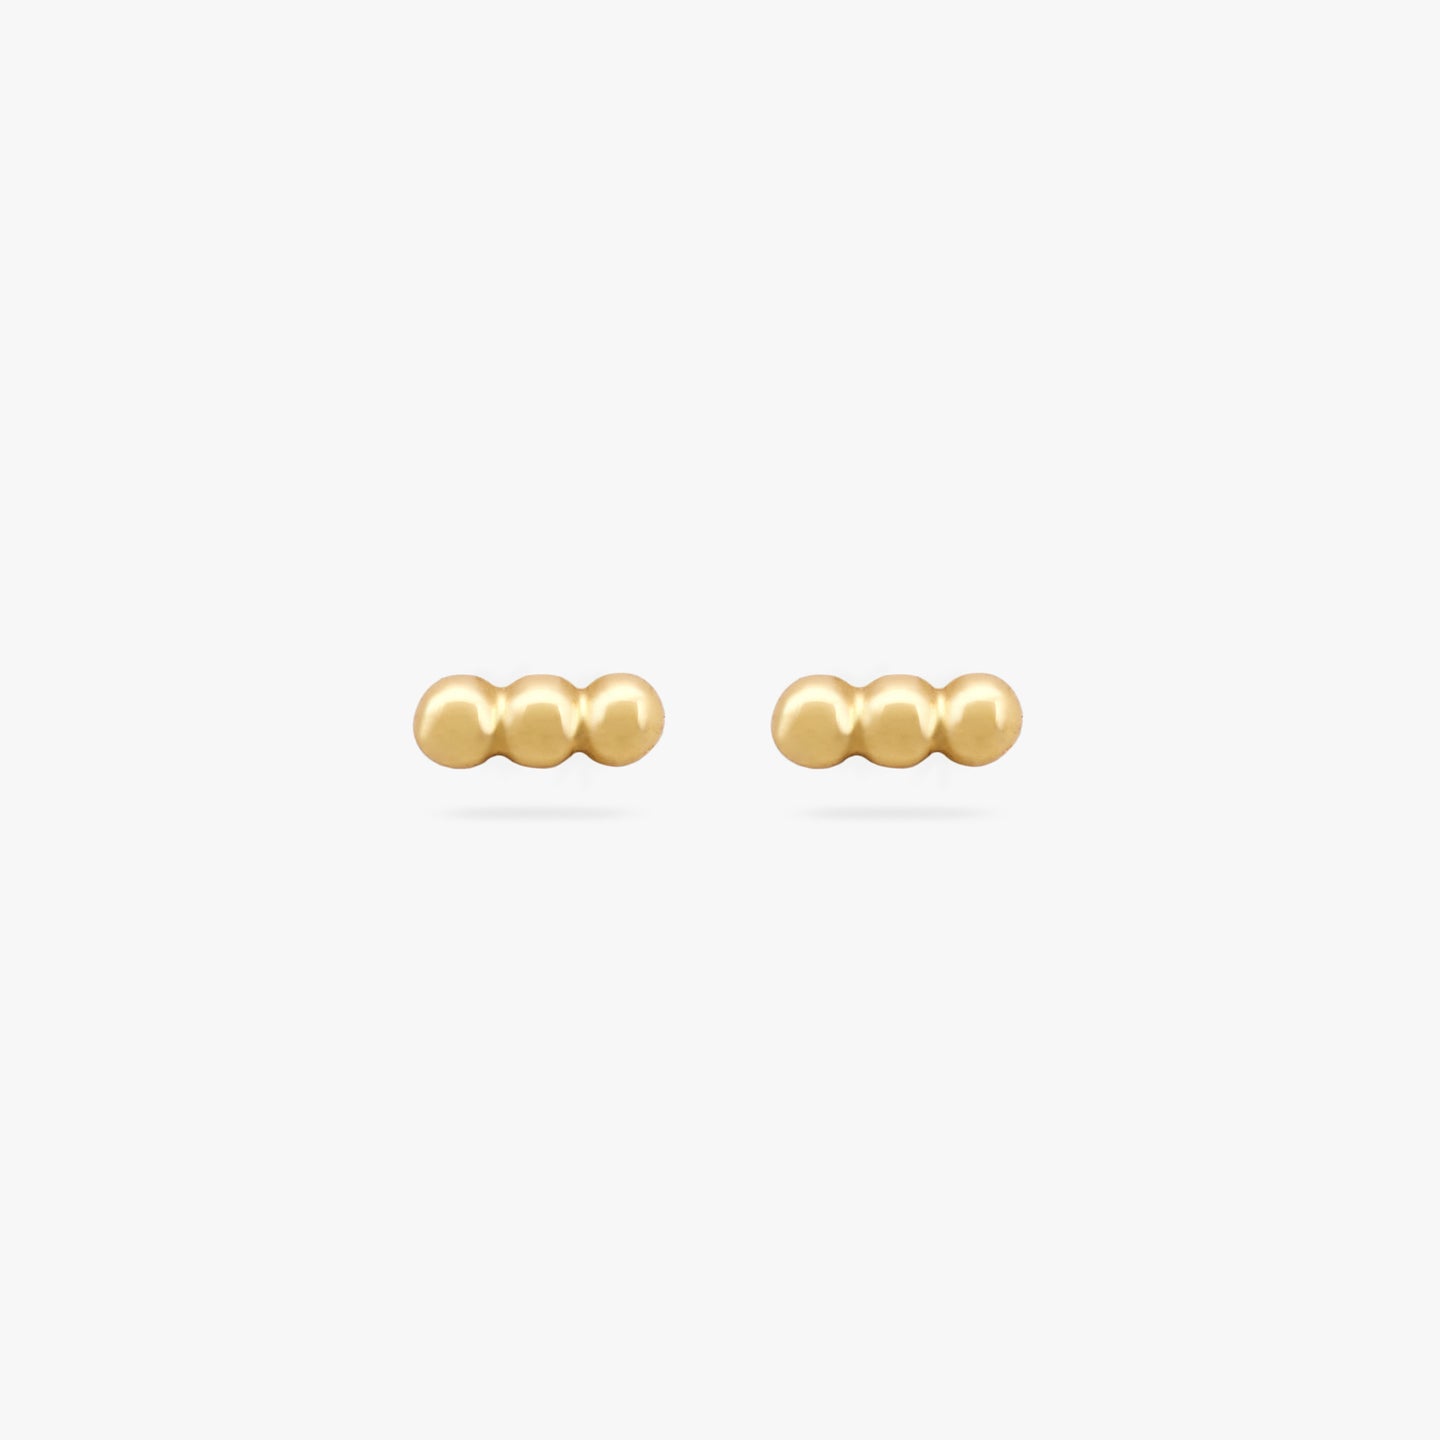 A pair of three gold beads arranged in two bar studs. color:null|gold